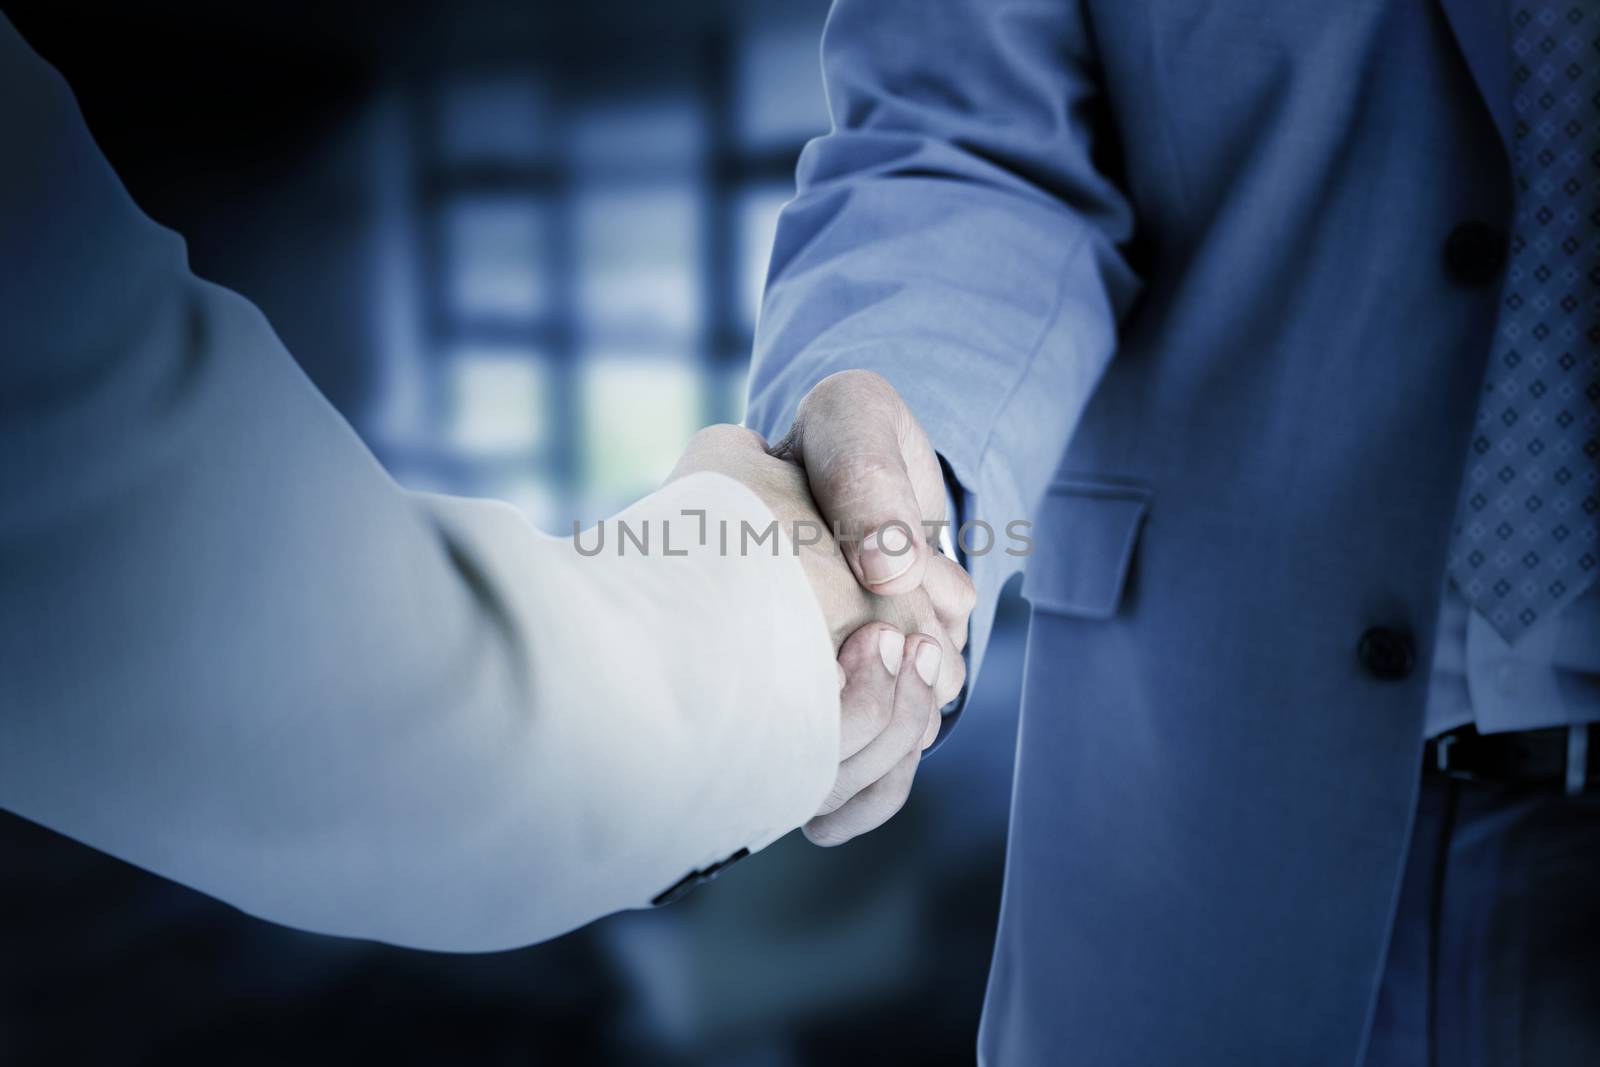 People in suit shaking hands against college